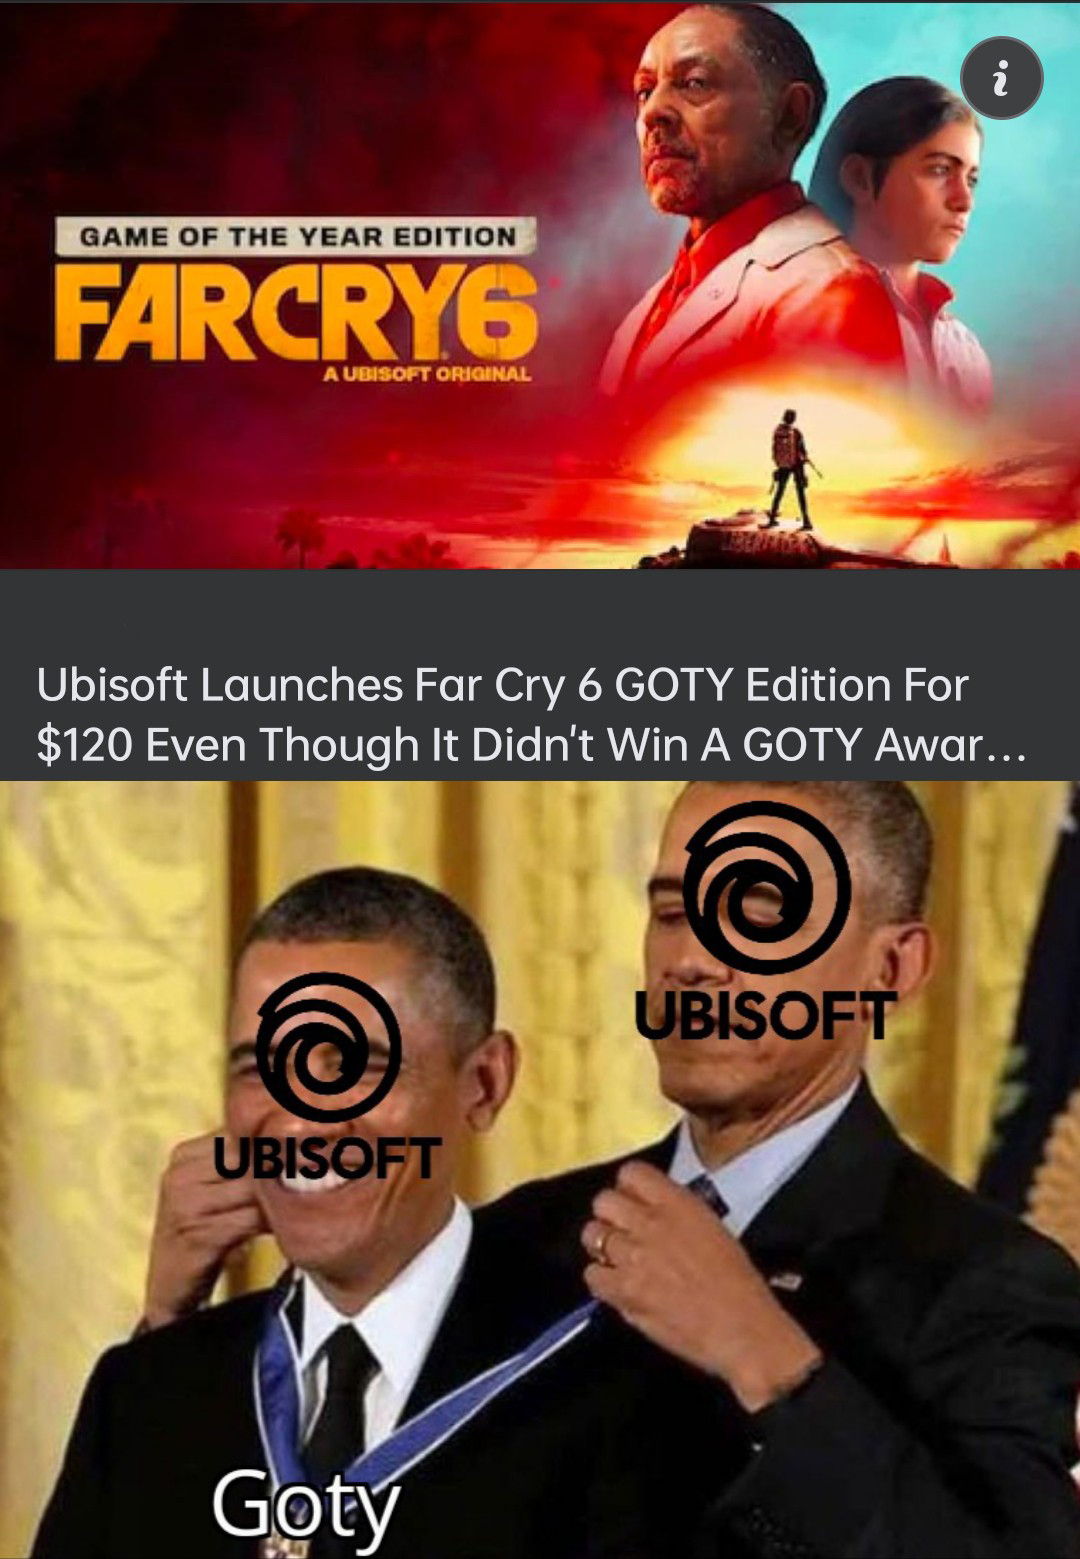 dank memes - film - Game Of The Year Edition FARCRY6 A Ubisoft Original Ubisoft Launches Far Cry 6 Goty Edition For $120 Even Though It Didn't Win A Goty Awar... Ubisoft Goty Ubisoft